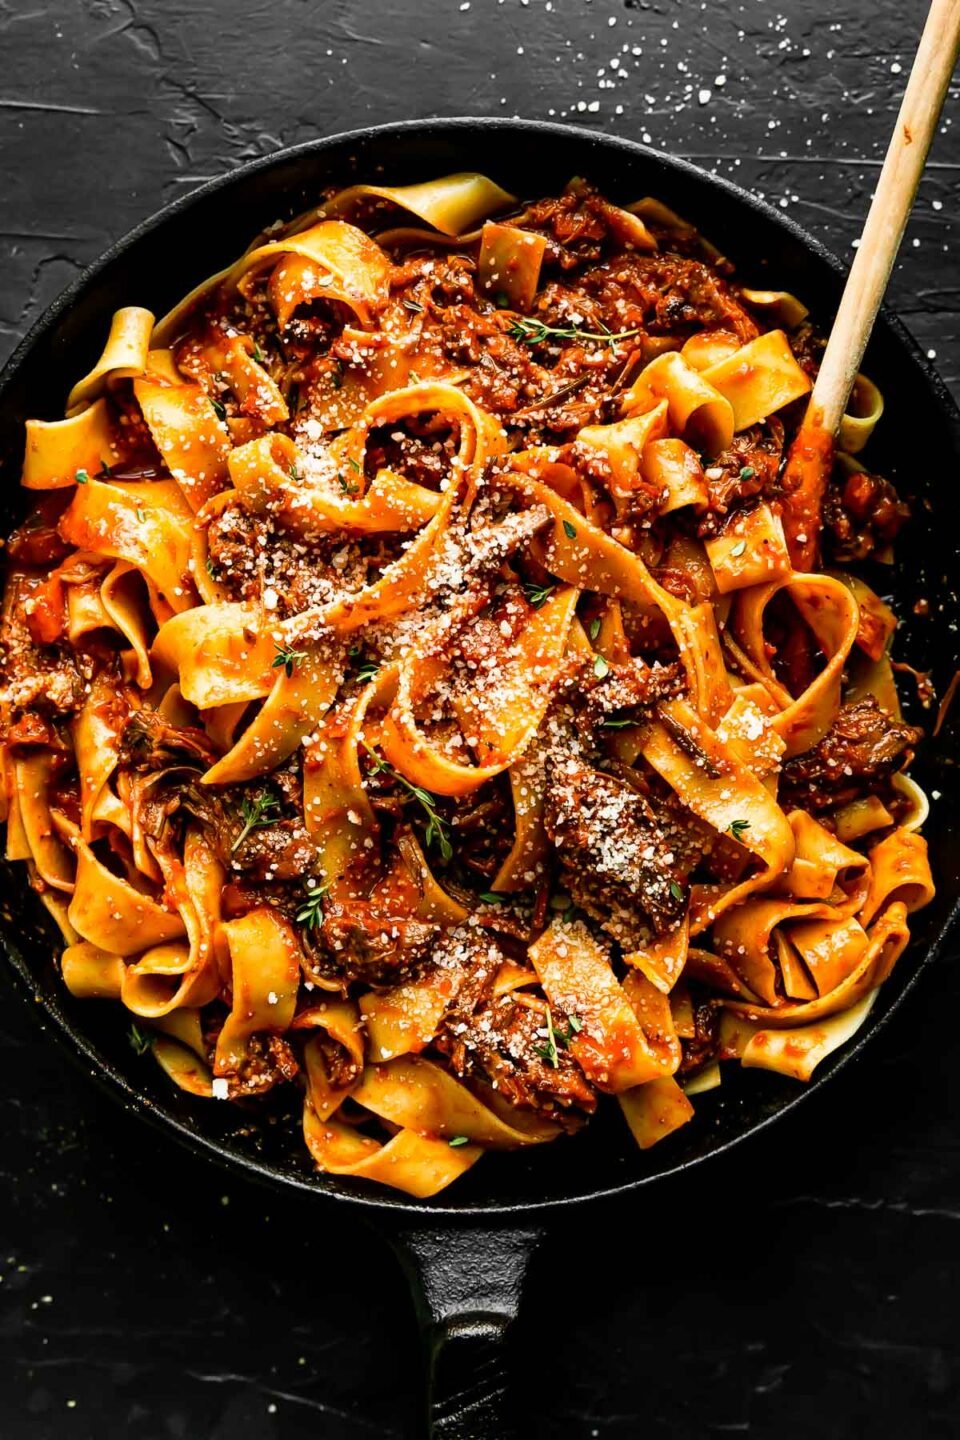 Finished beef ragu fills a large black skillet. The ragu pasta has been garnished with fresh thyme leaves and grated parmesan. The skillet sits atop a black textured surface and a wooden spoon rests inside of the skillet.